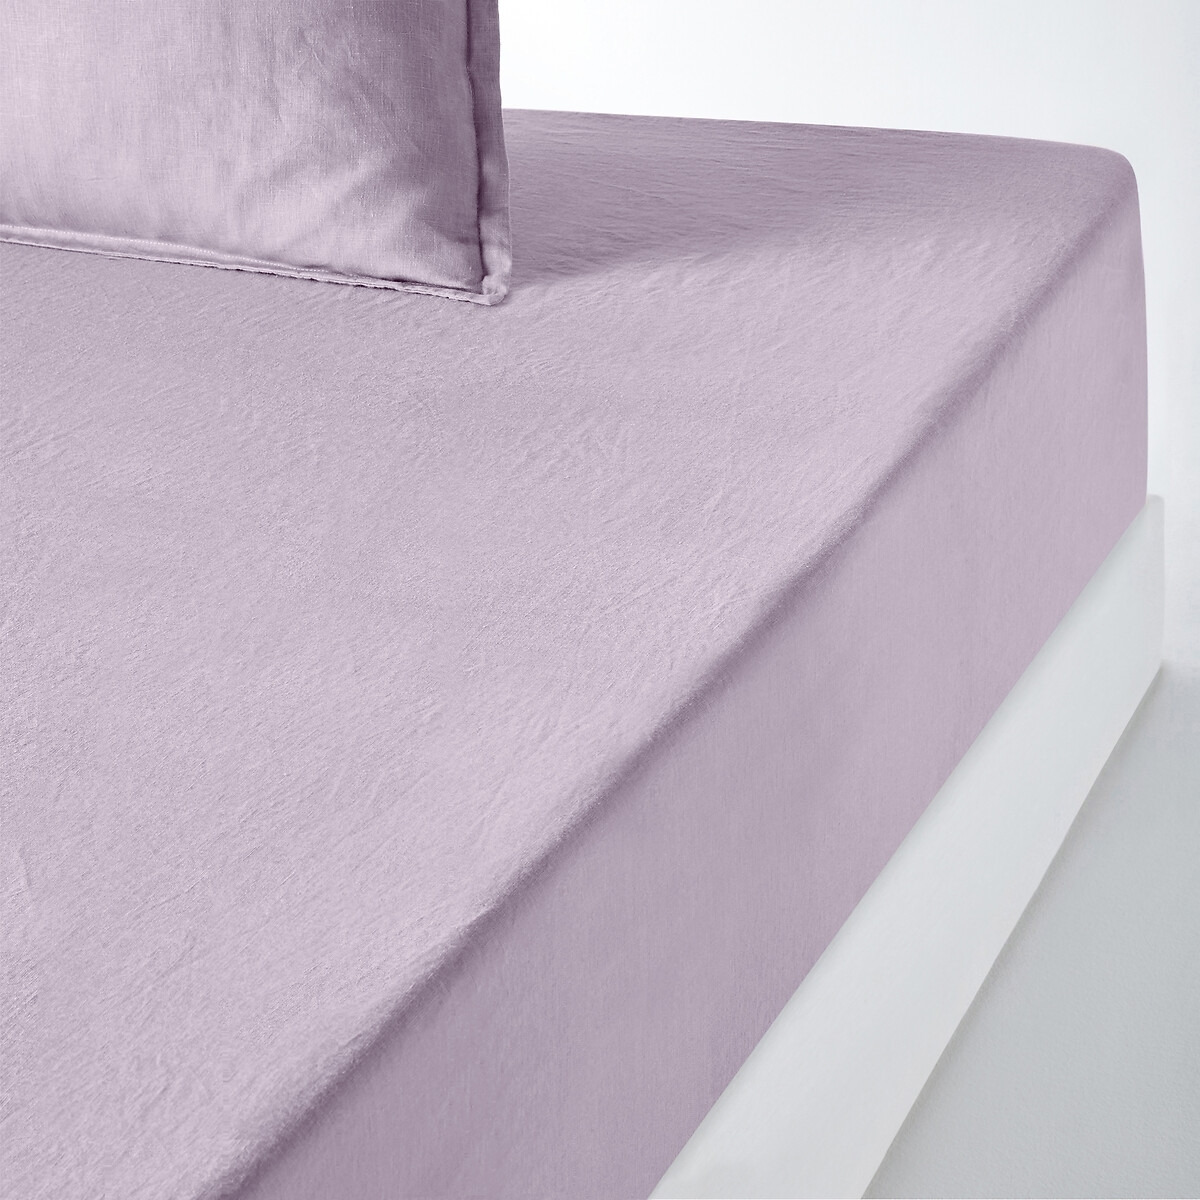 Linot 35cm High 100% Washed Linen Fitted Sheet - image 1